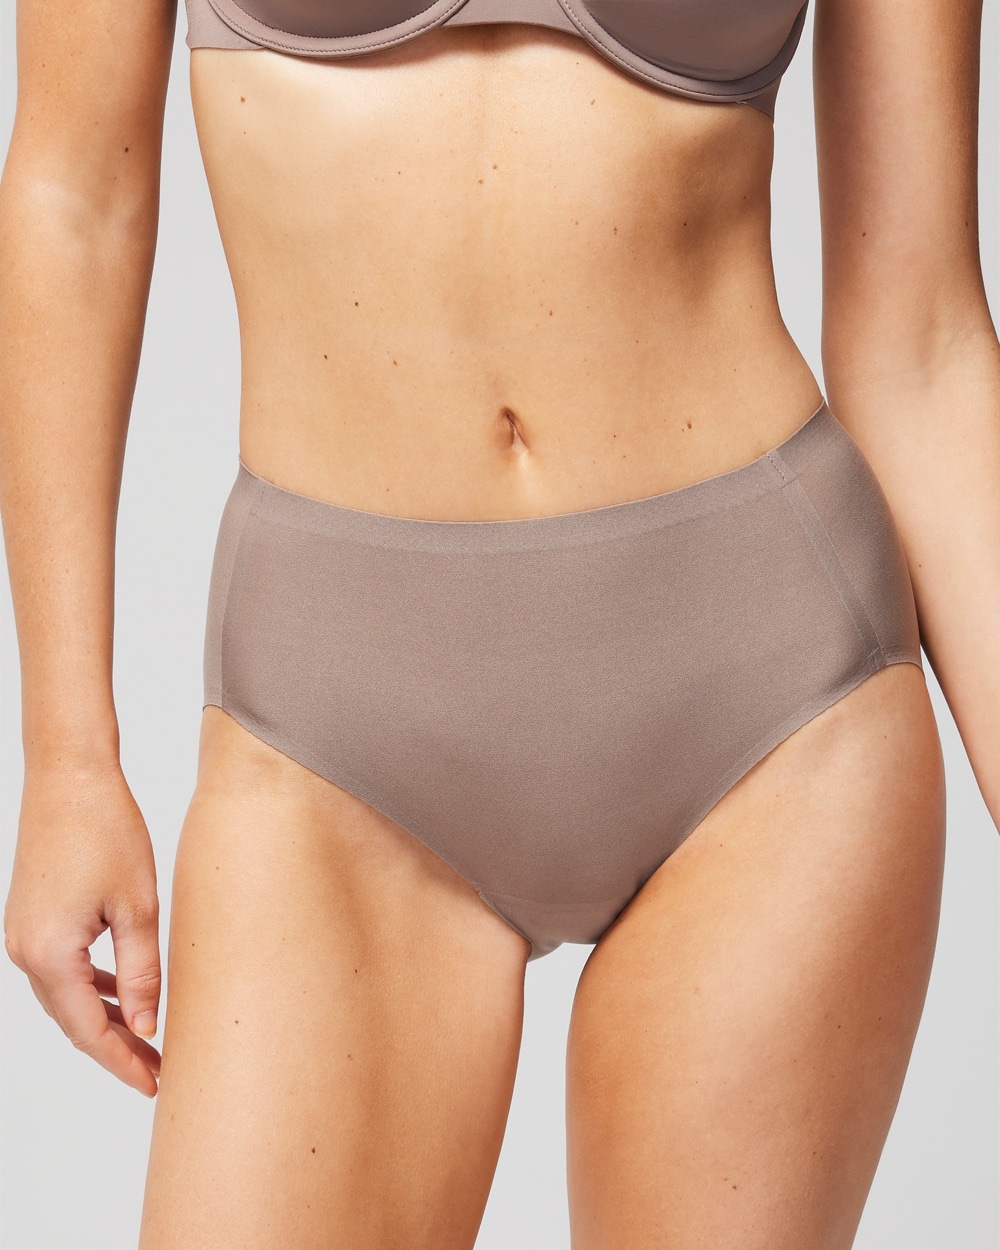 Soma Intimates - Enbliss™ panties have arrived in nudes